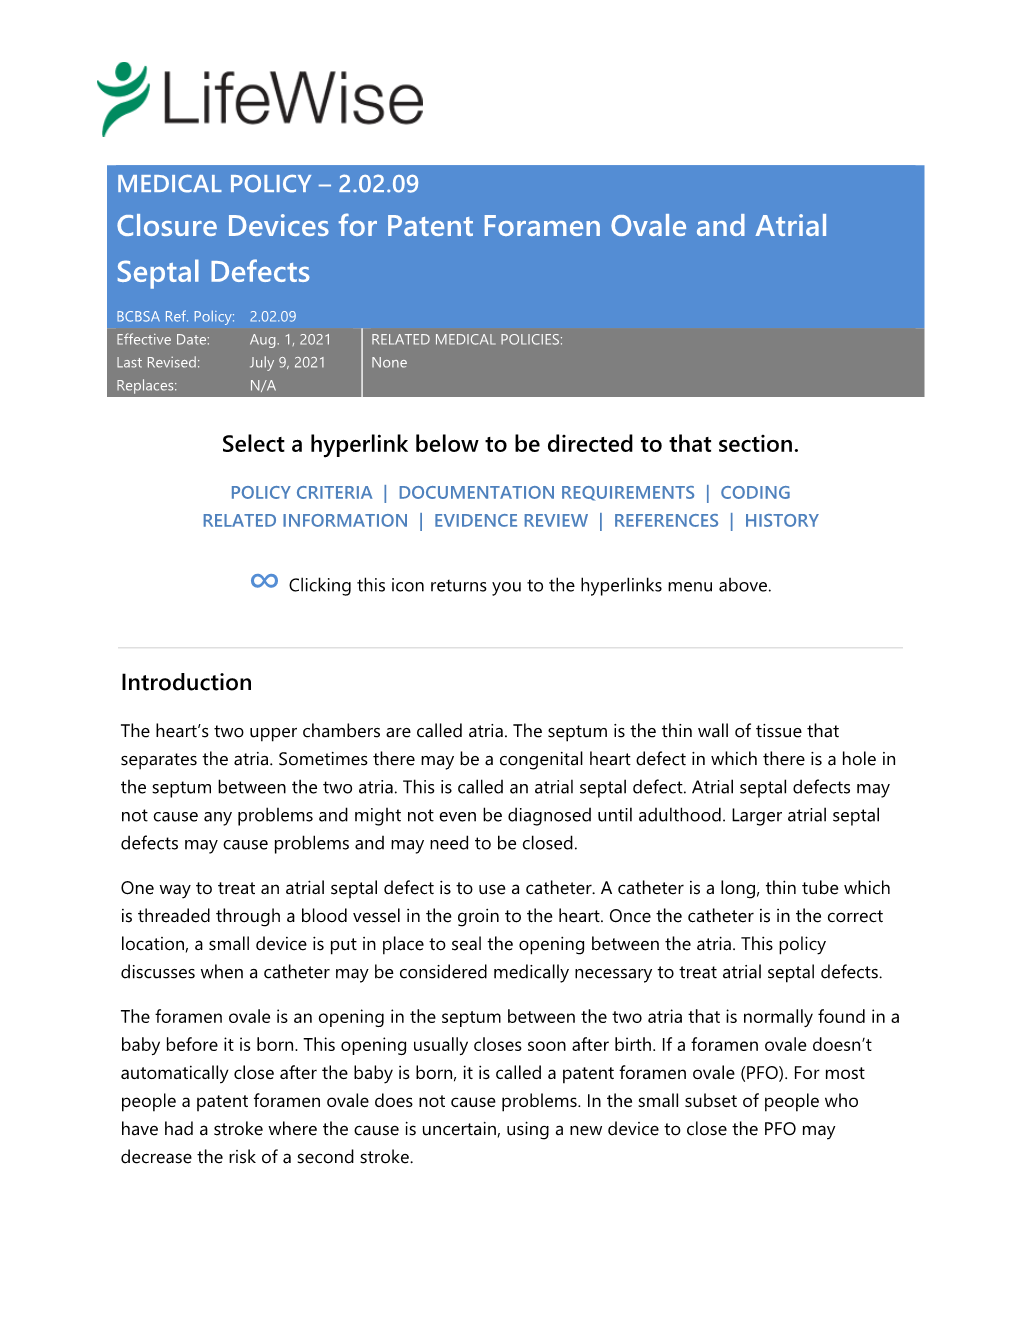 2.02.09 Closure Devices for Patent Foramen Ovale and Atrial Septal Defects